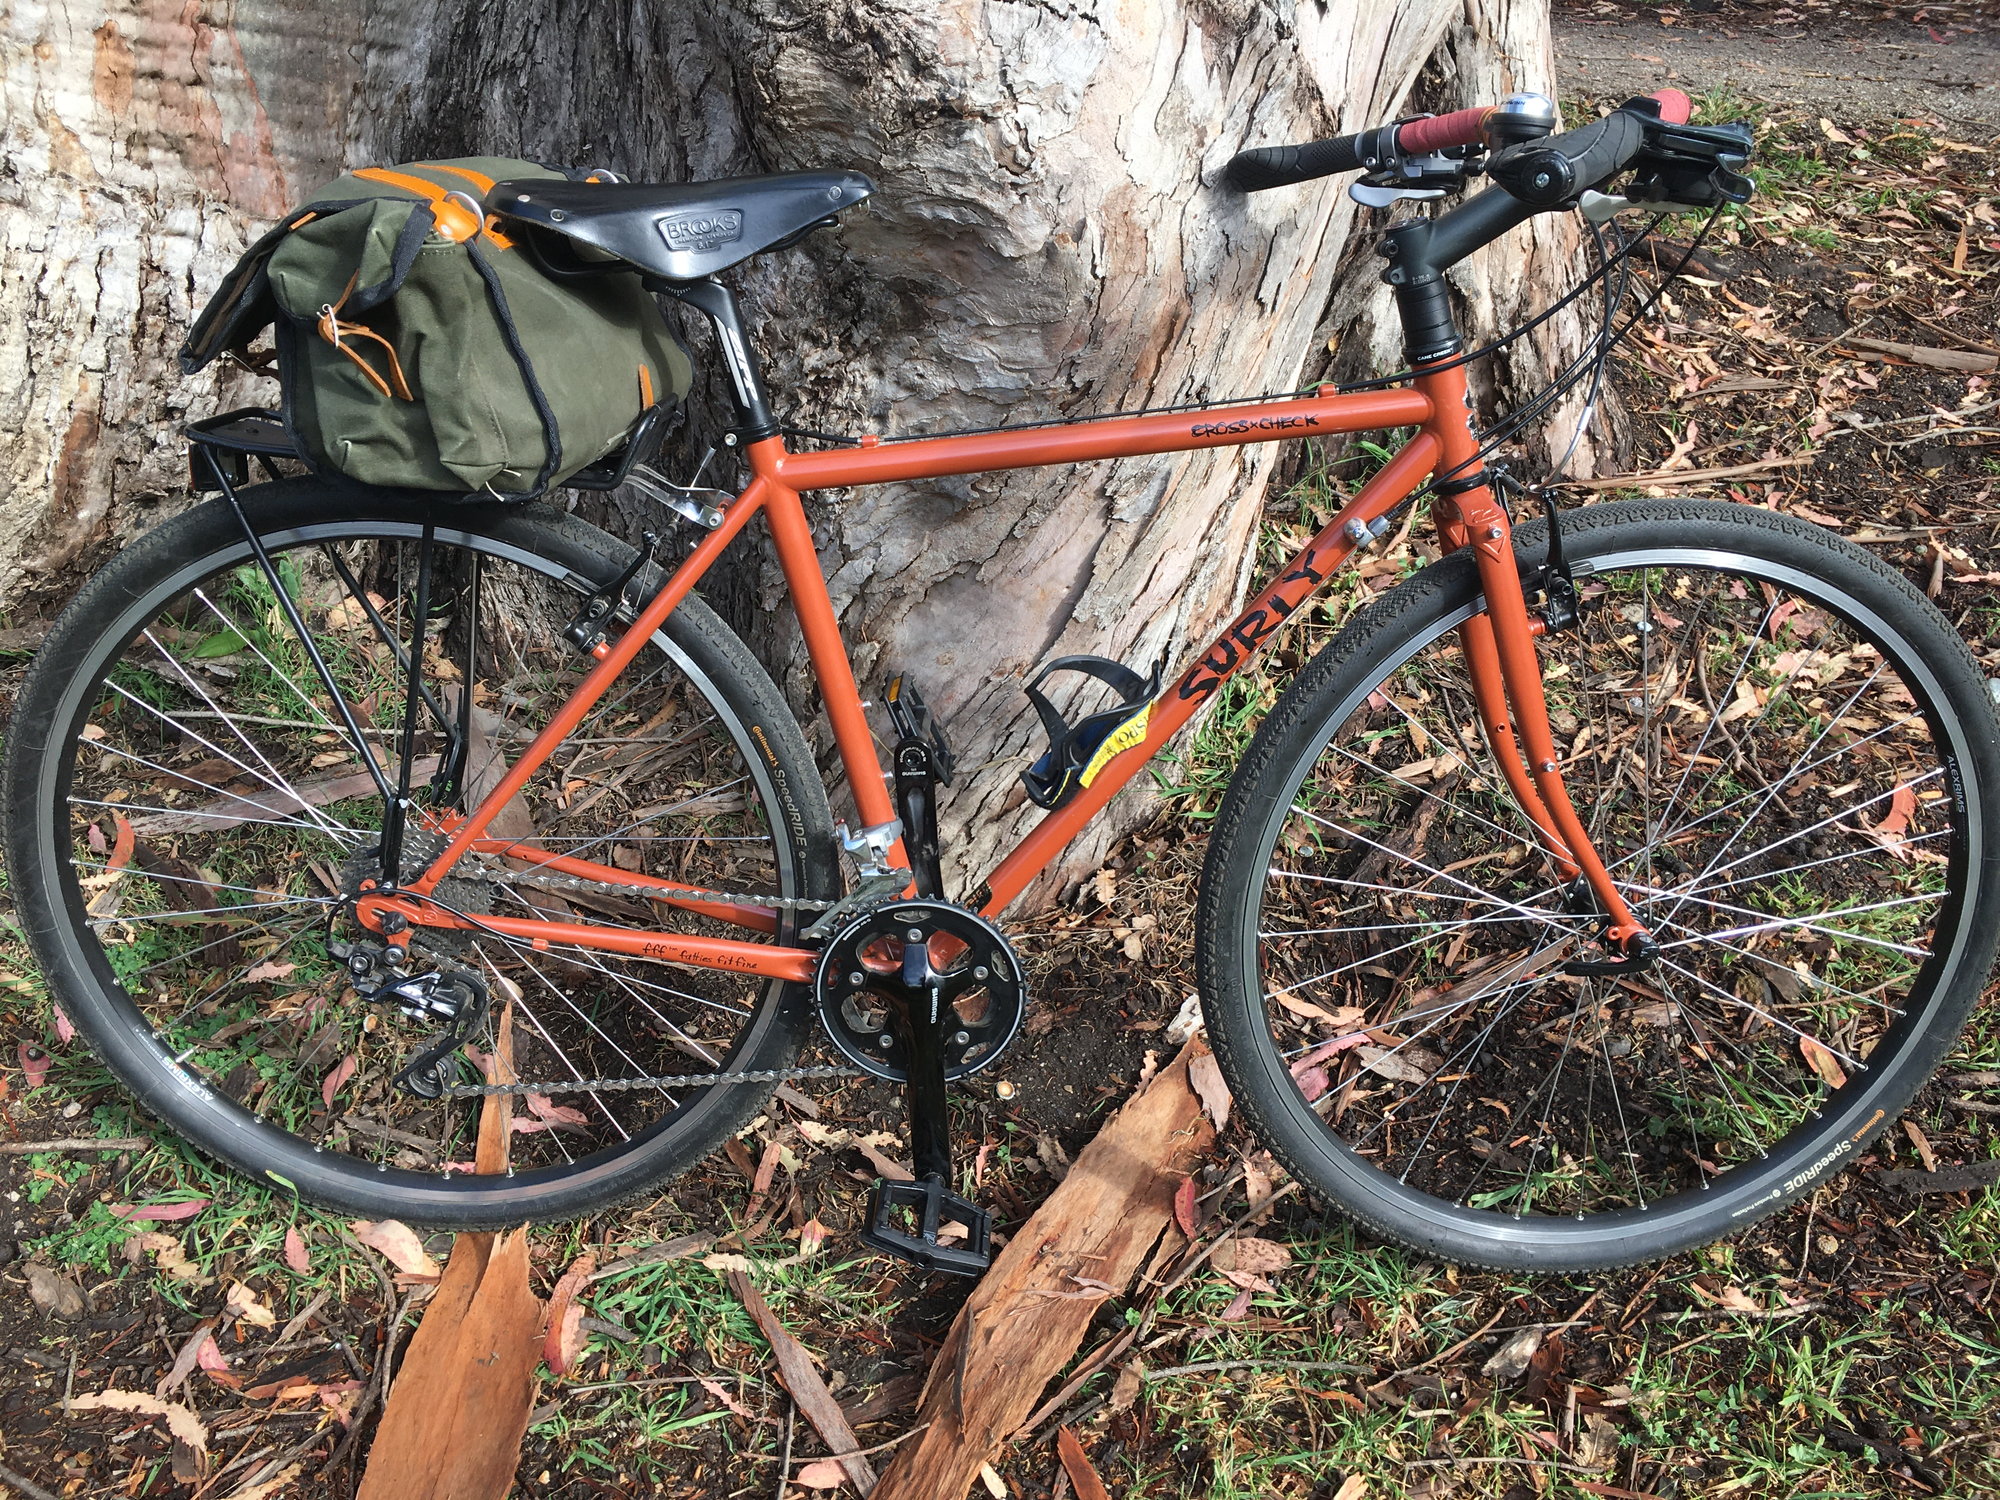 Surly carries more people and gear with Flat Bar Cross Check, all